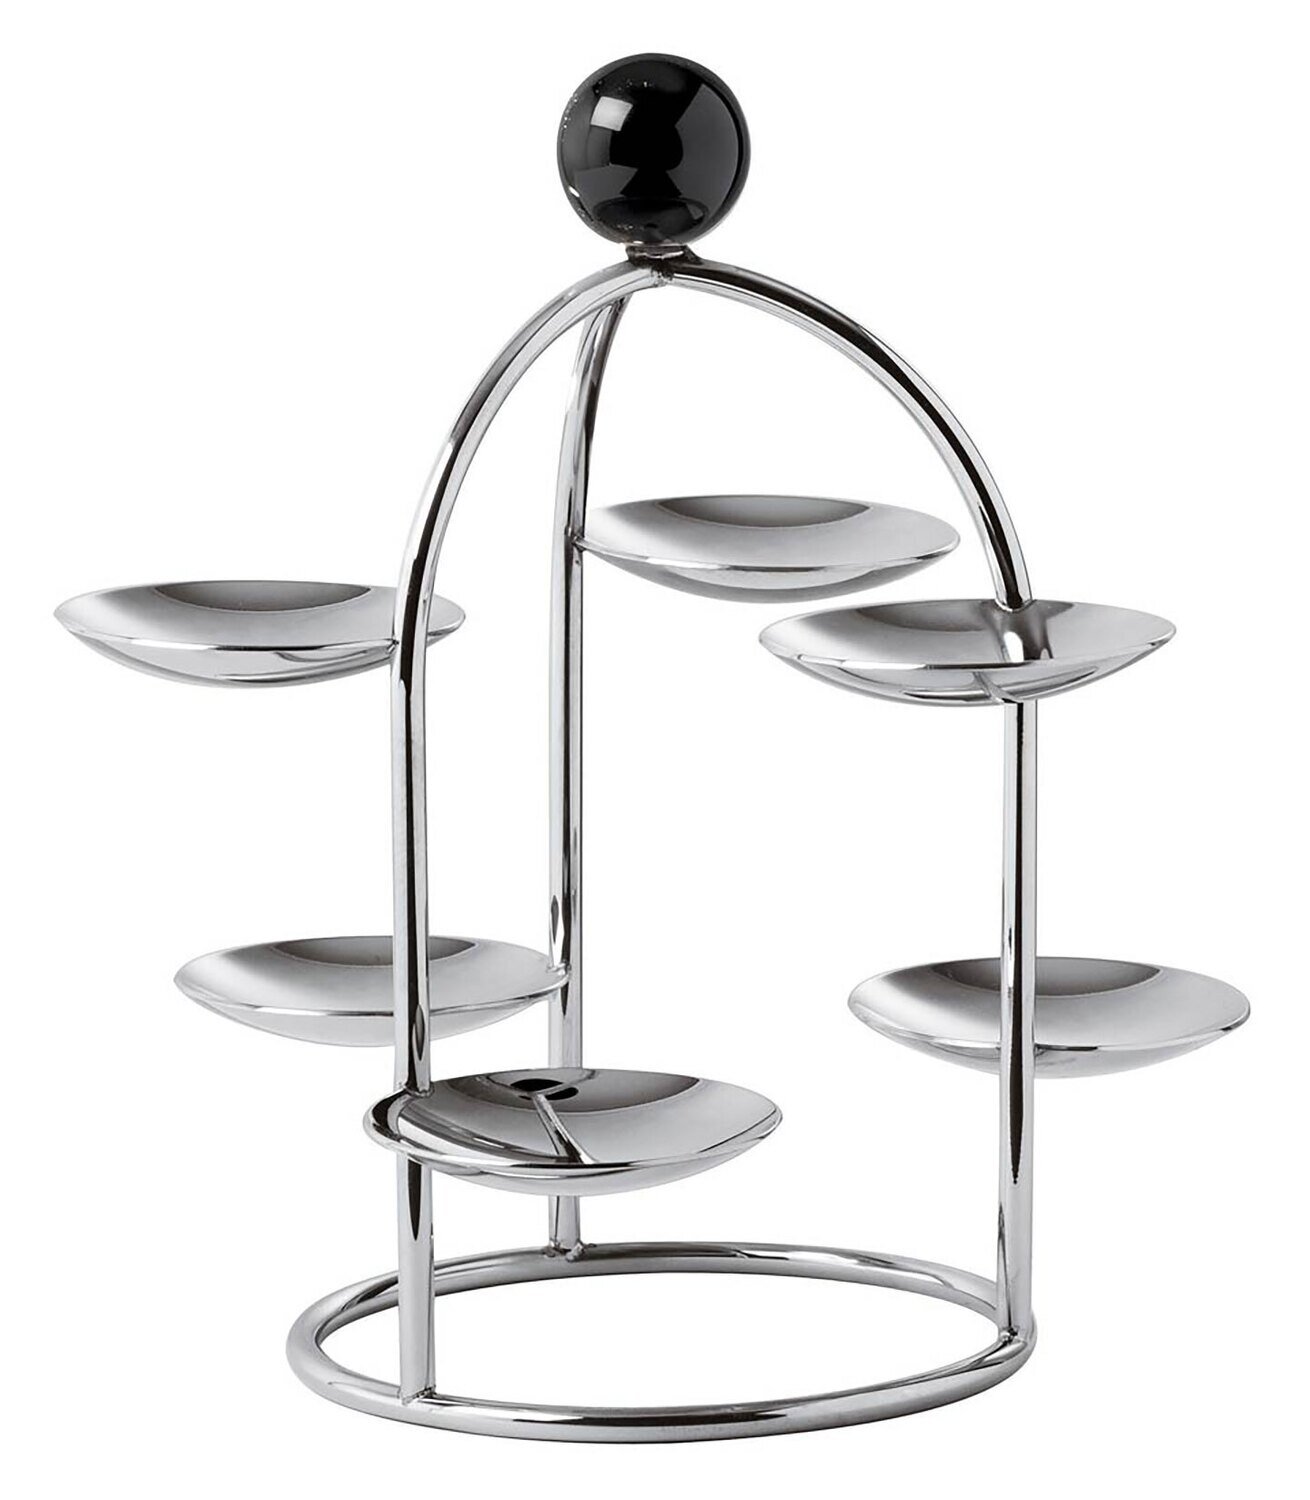 Sambonet Penelope Pastry Stand 6 Small Dishes 55577-A6